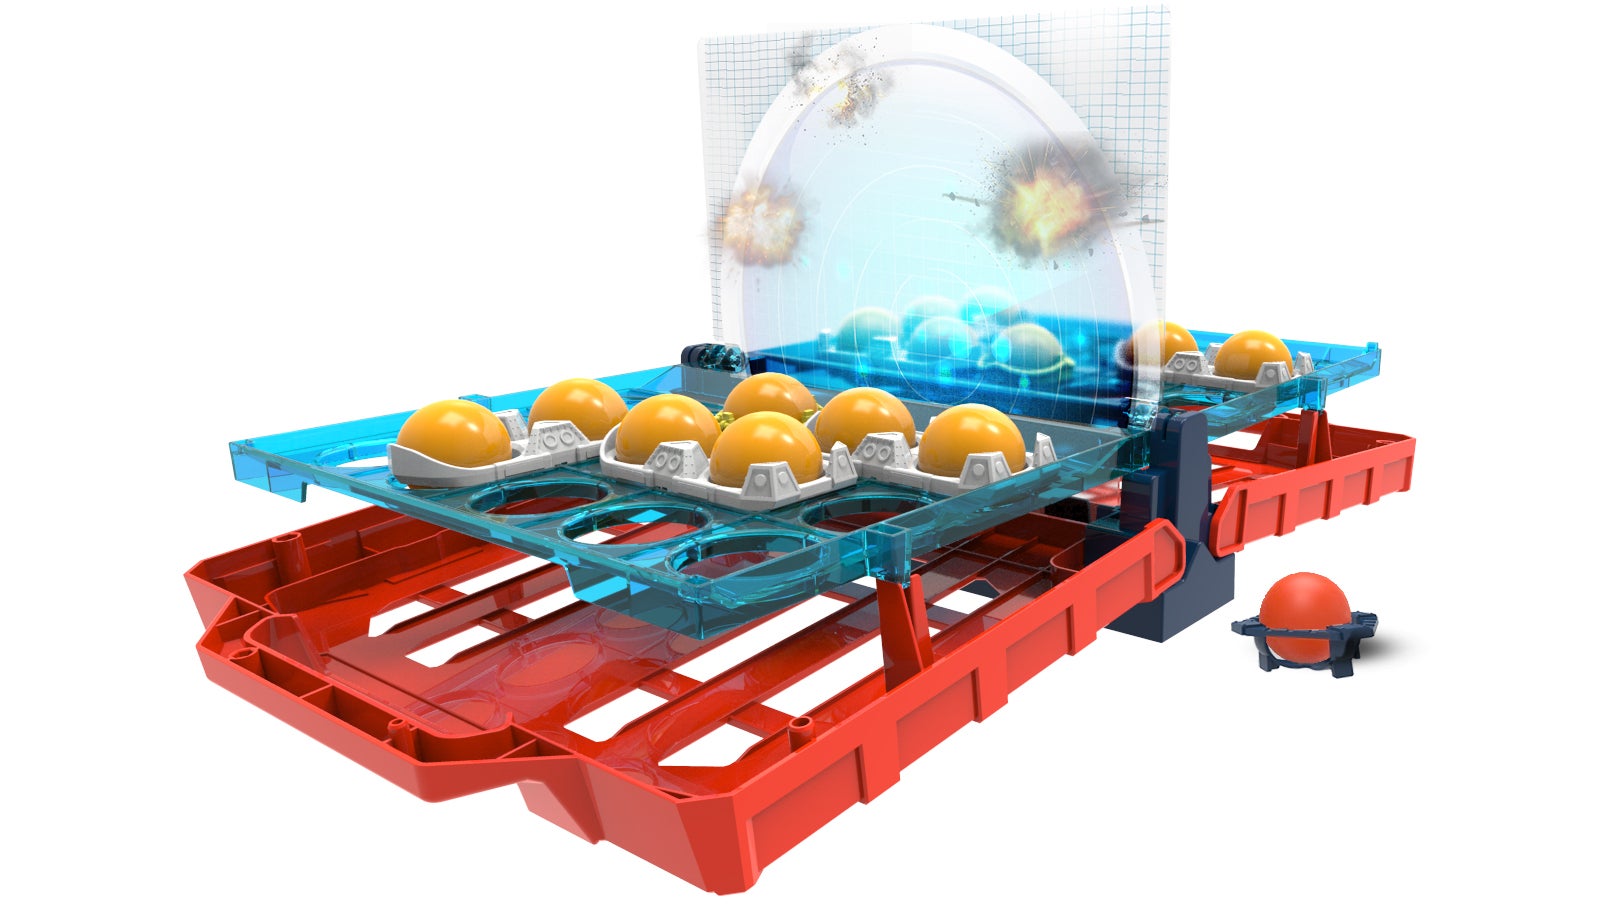 Hasbro Updated Battleship For The Beer Pong Generation